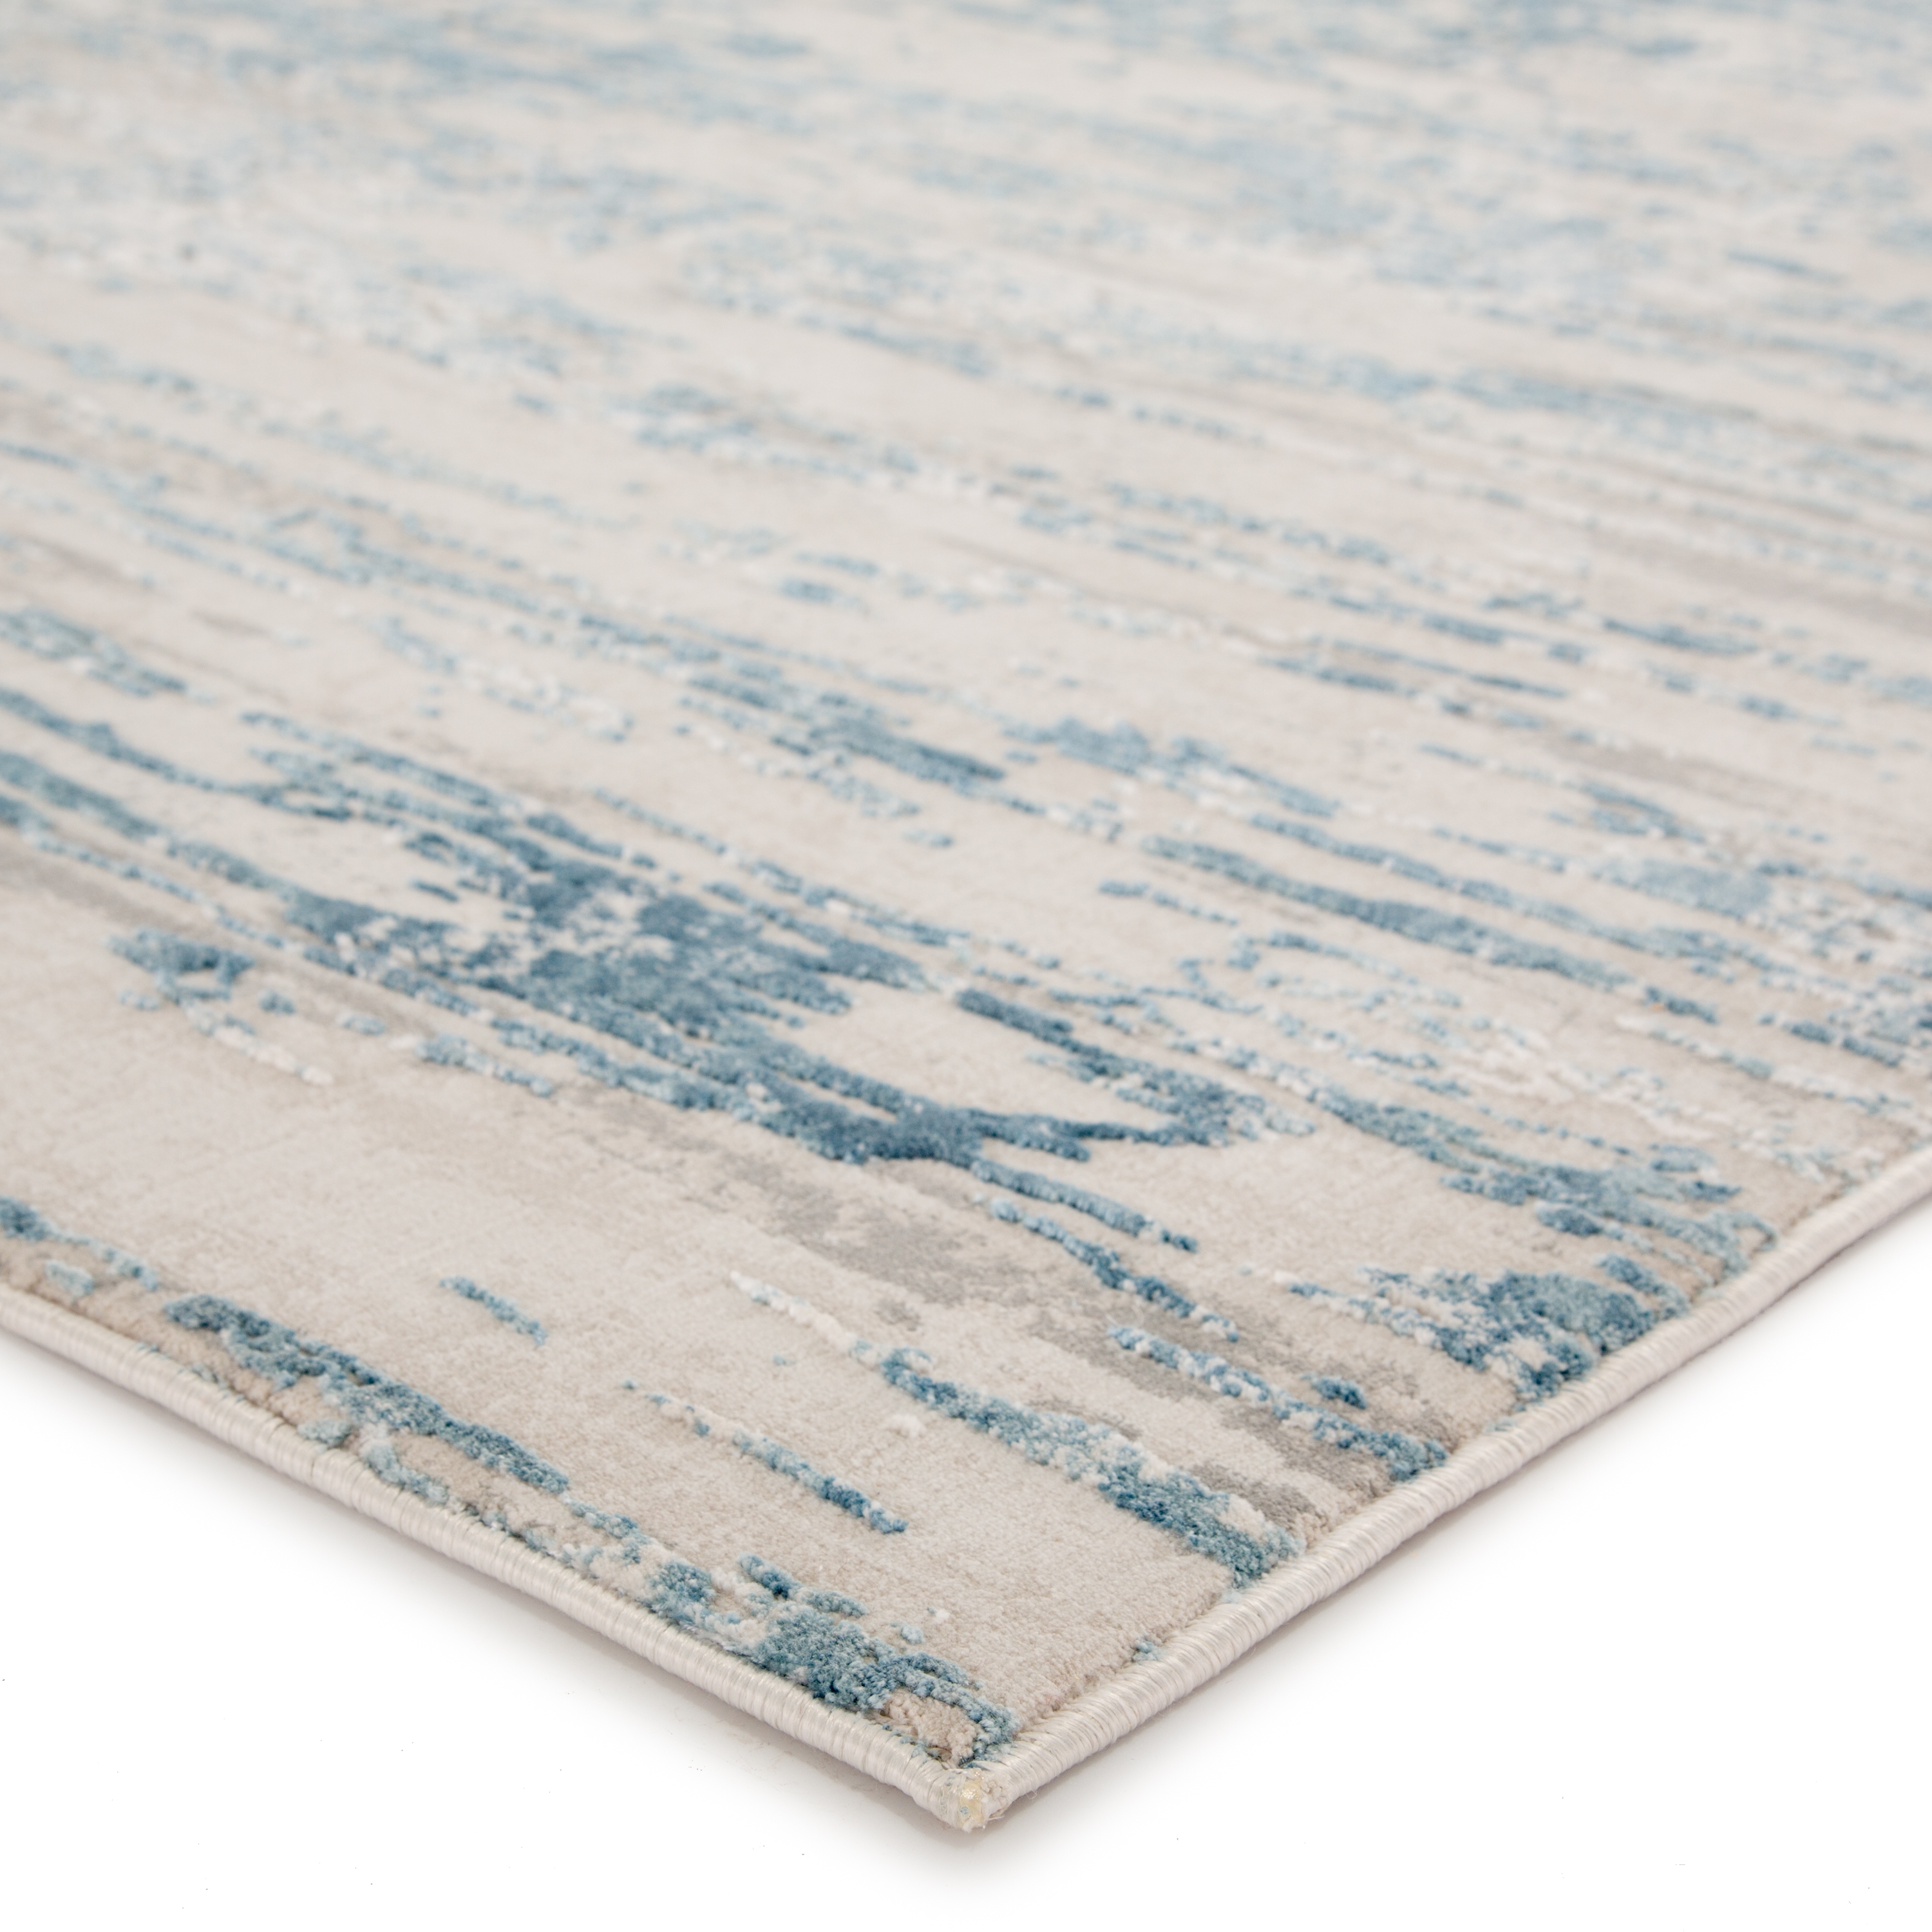 Celil Abstract Ivory/ Blue Area Rug (4'X6') - Image 1